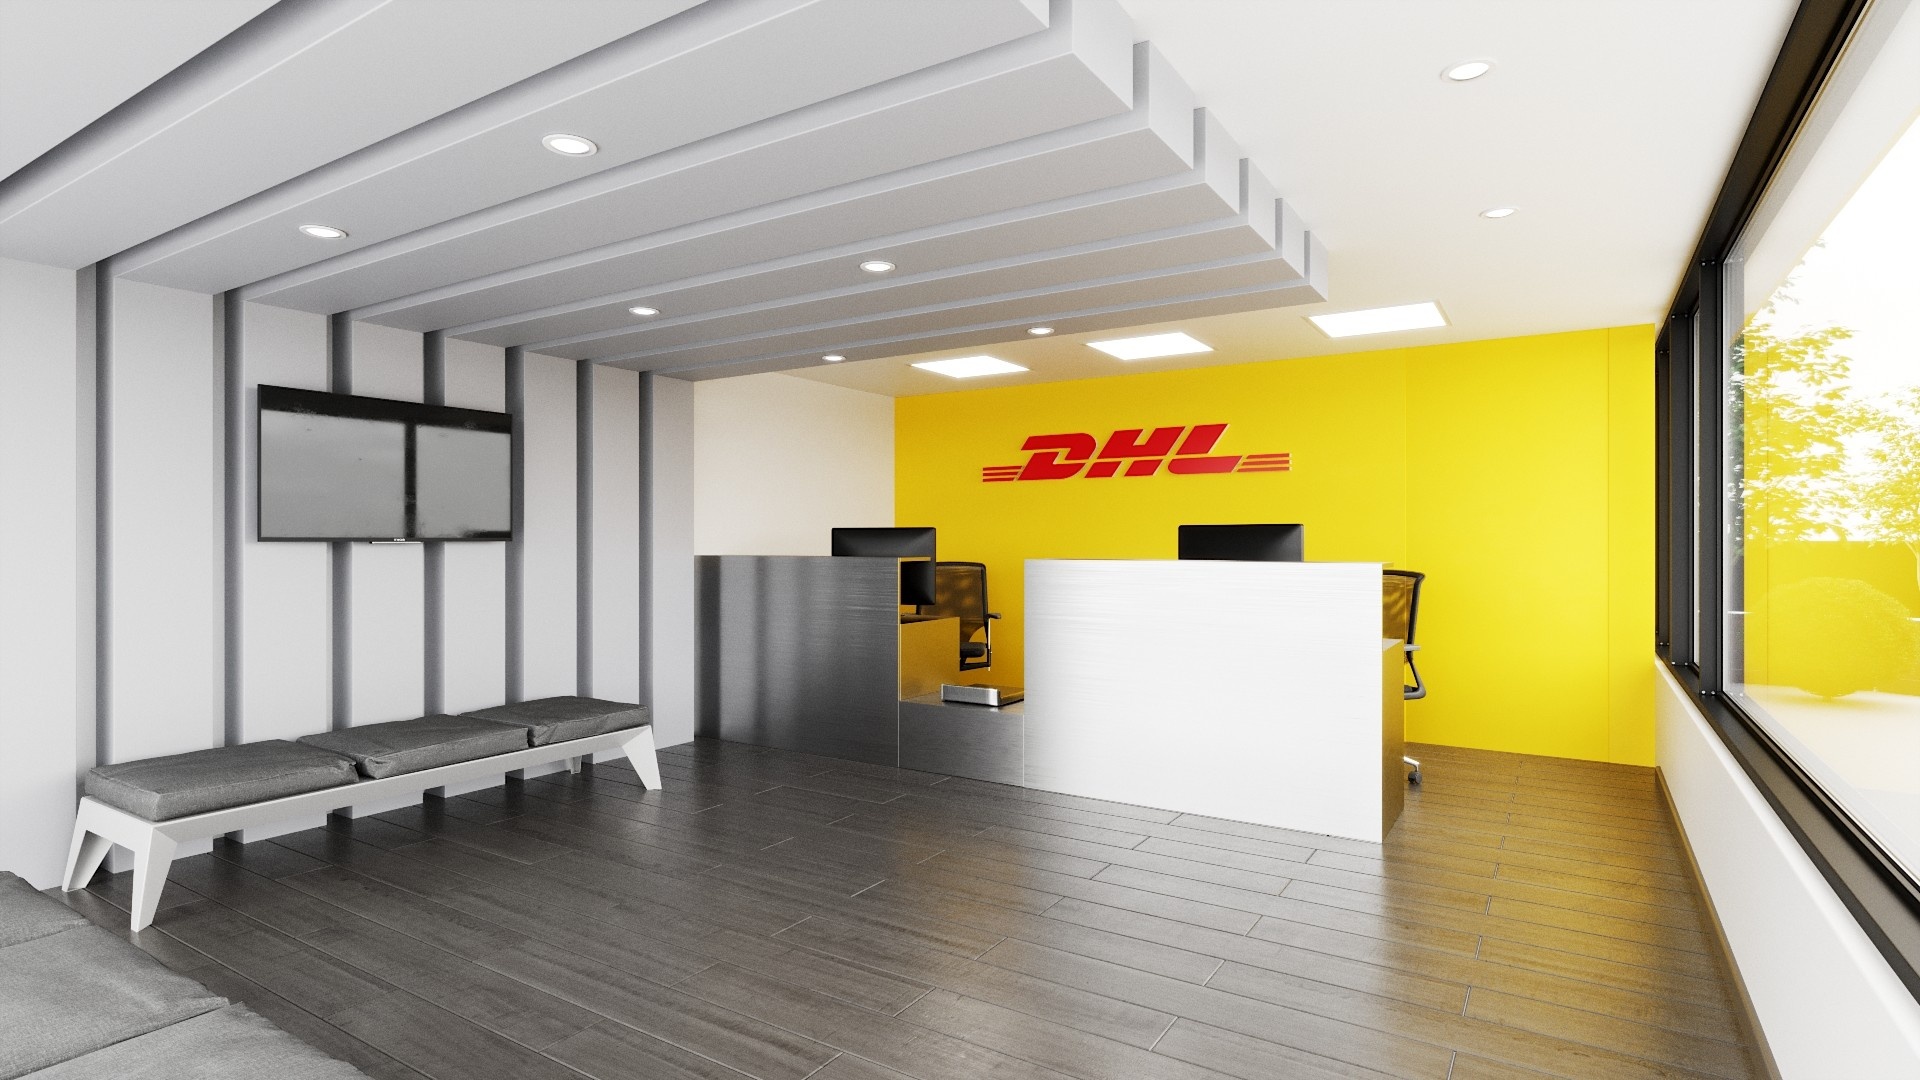 DHL: Standard international and domestic parcel services, Package delivery. 1920x1080 Full HD Background.